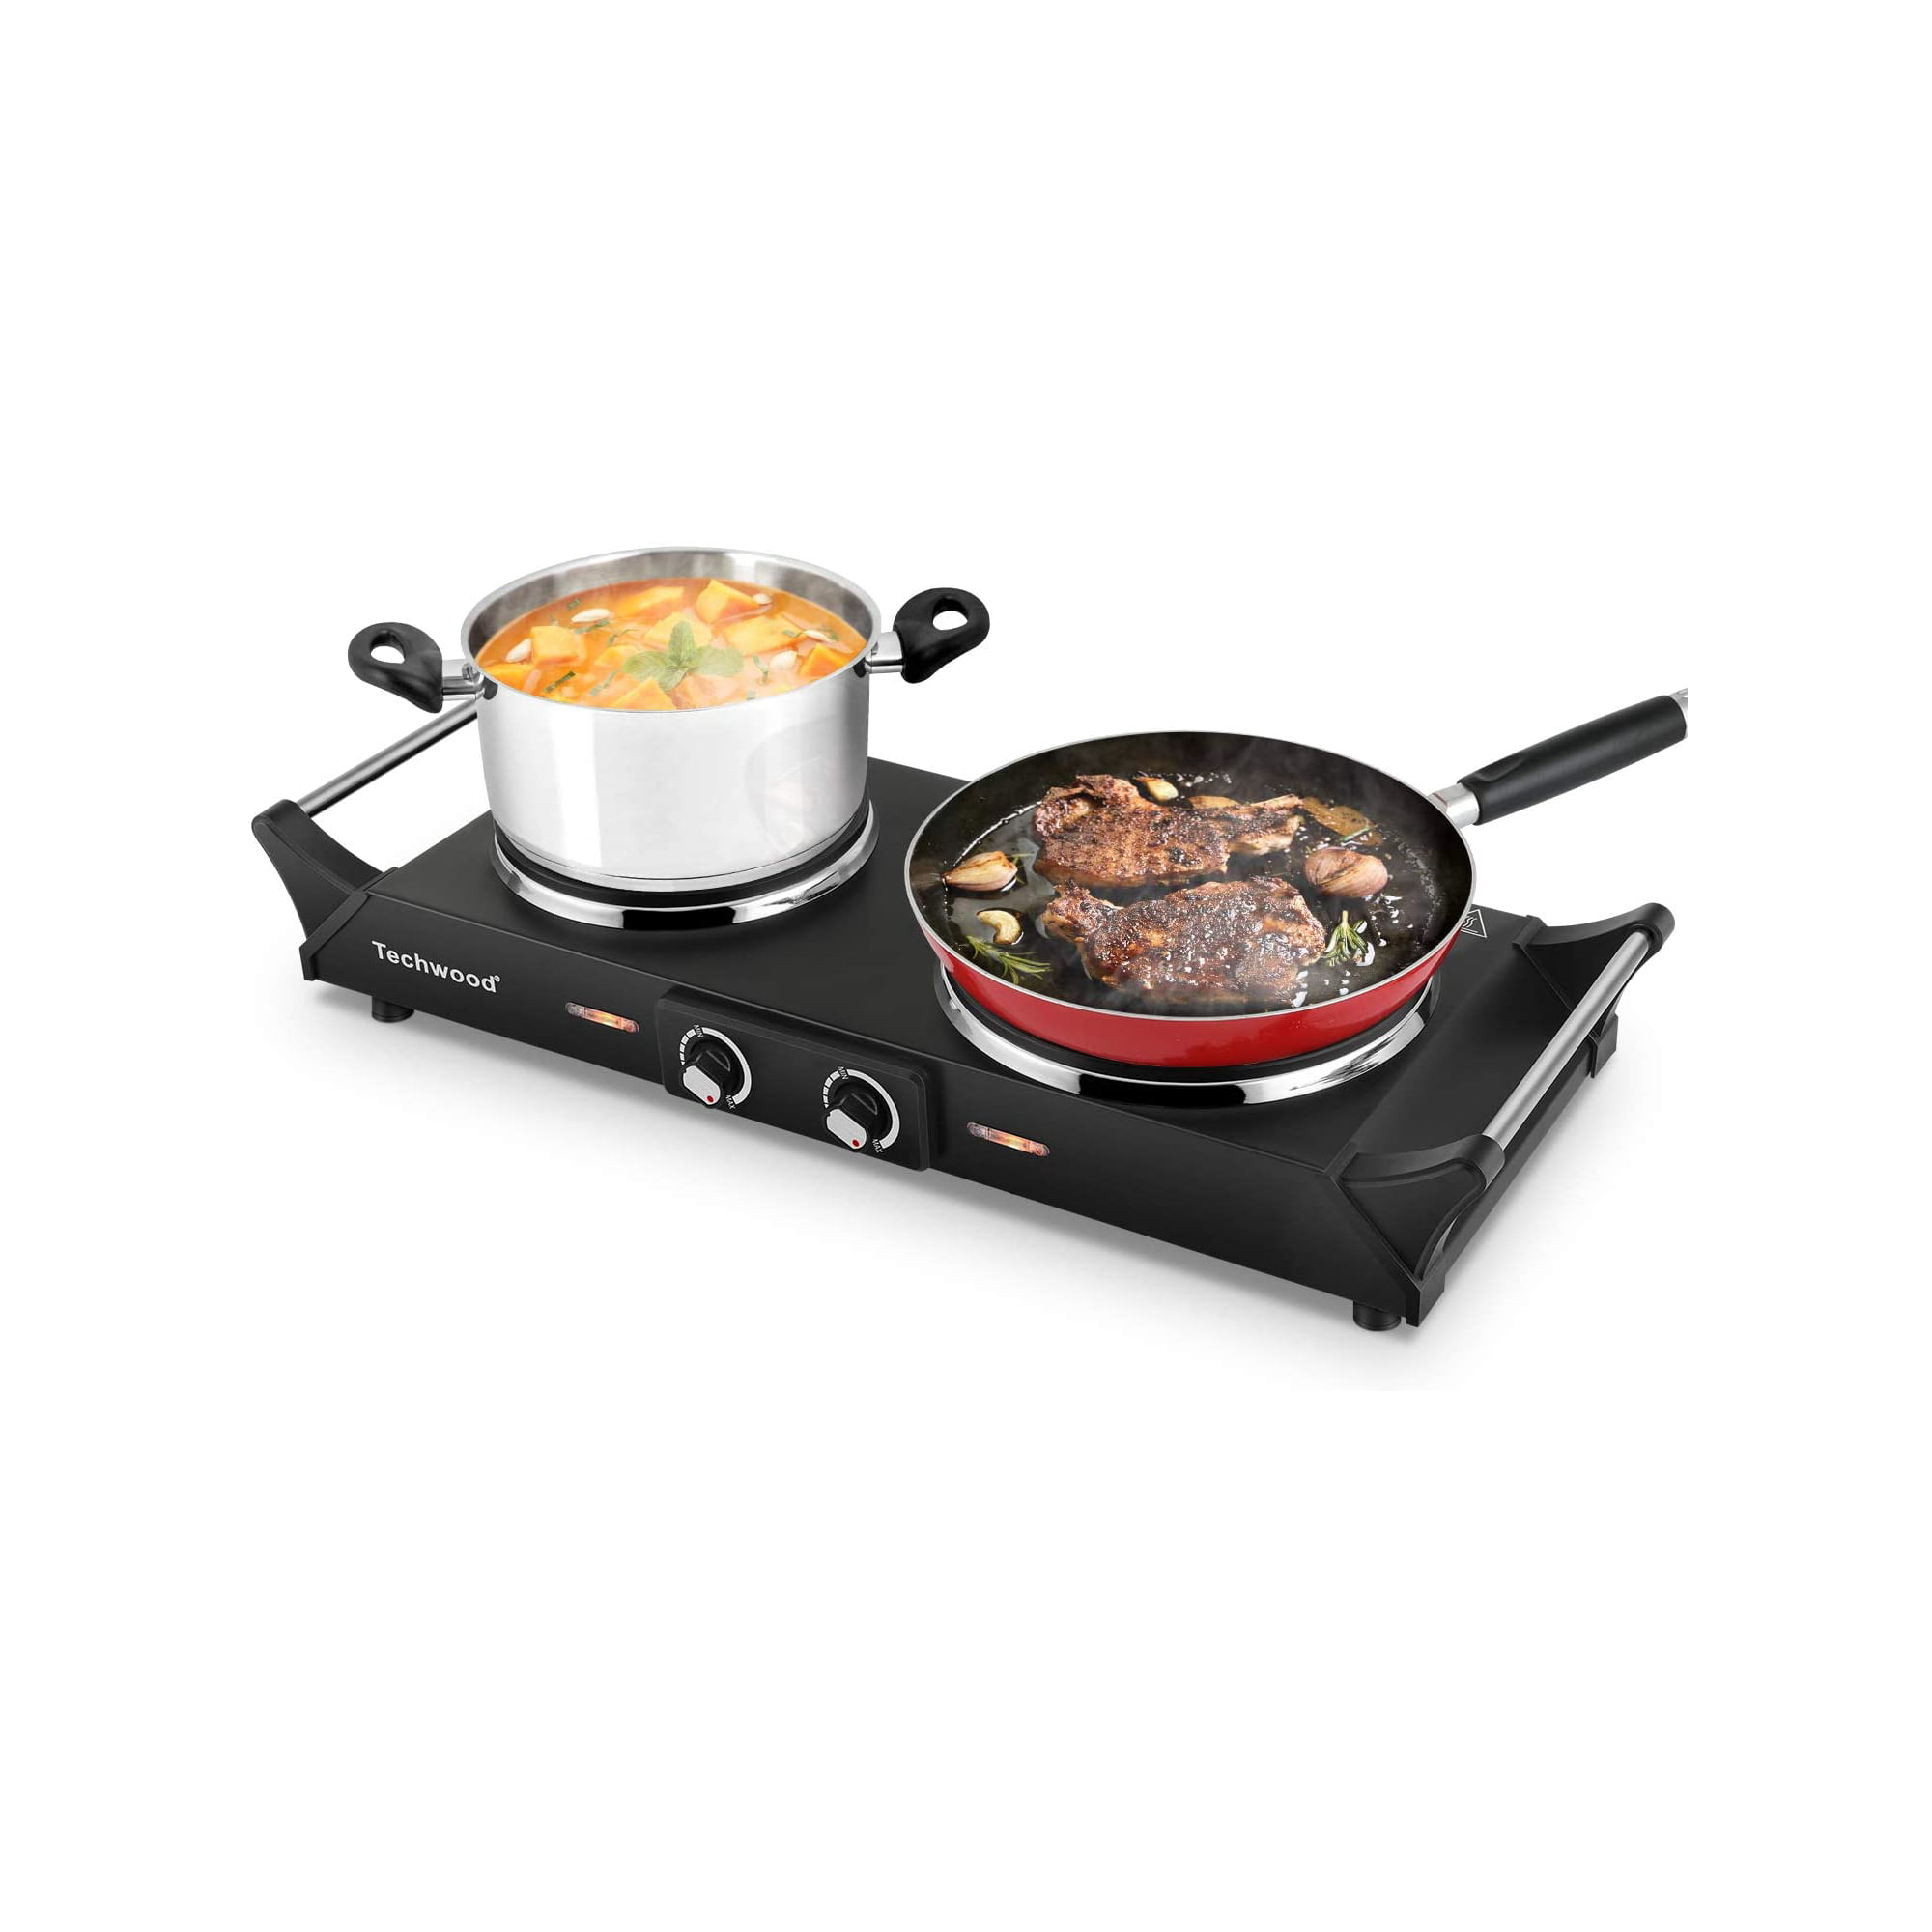 https://themarketdepot.com/wp-content/uploads/2023/01/Techwood-Hot-Plate-Electric-Single-Burner-1800W-Portable-Burner-for-Cooking-with-Adjustable-Temperature-Stay-Cool-Handles-Non-Slip-Rubber-Feet-Black-Stainless-Steel-Easy-To-Clean-3.jpeg